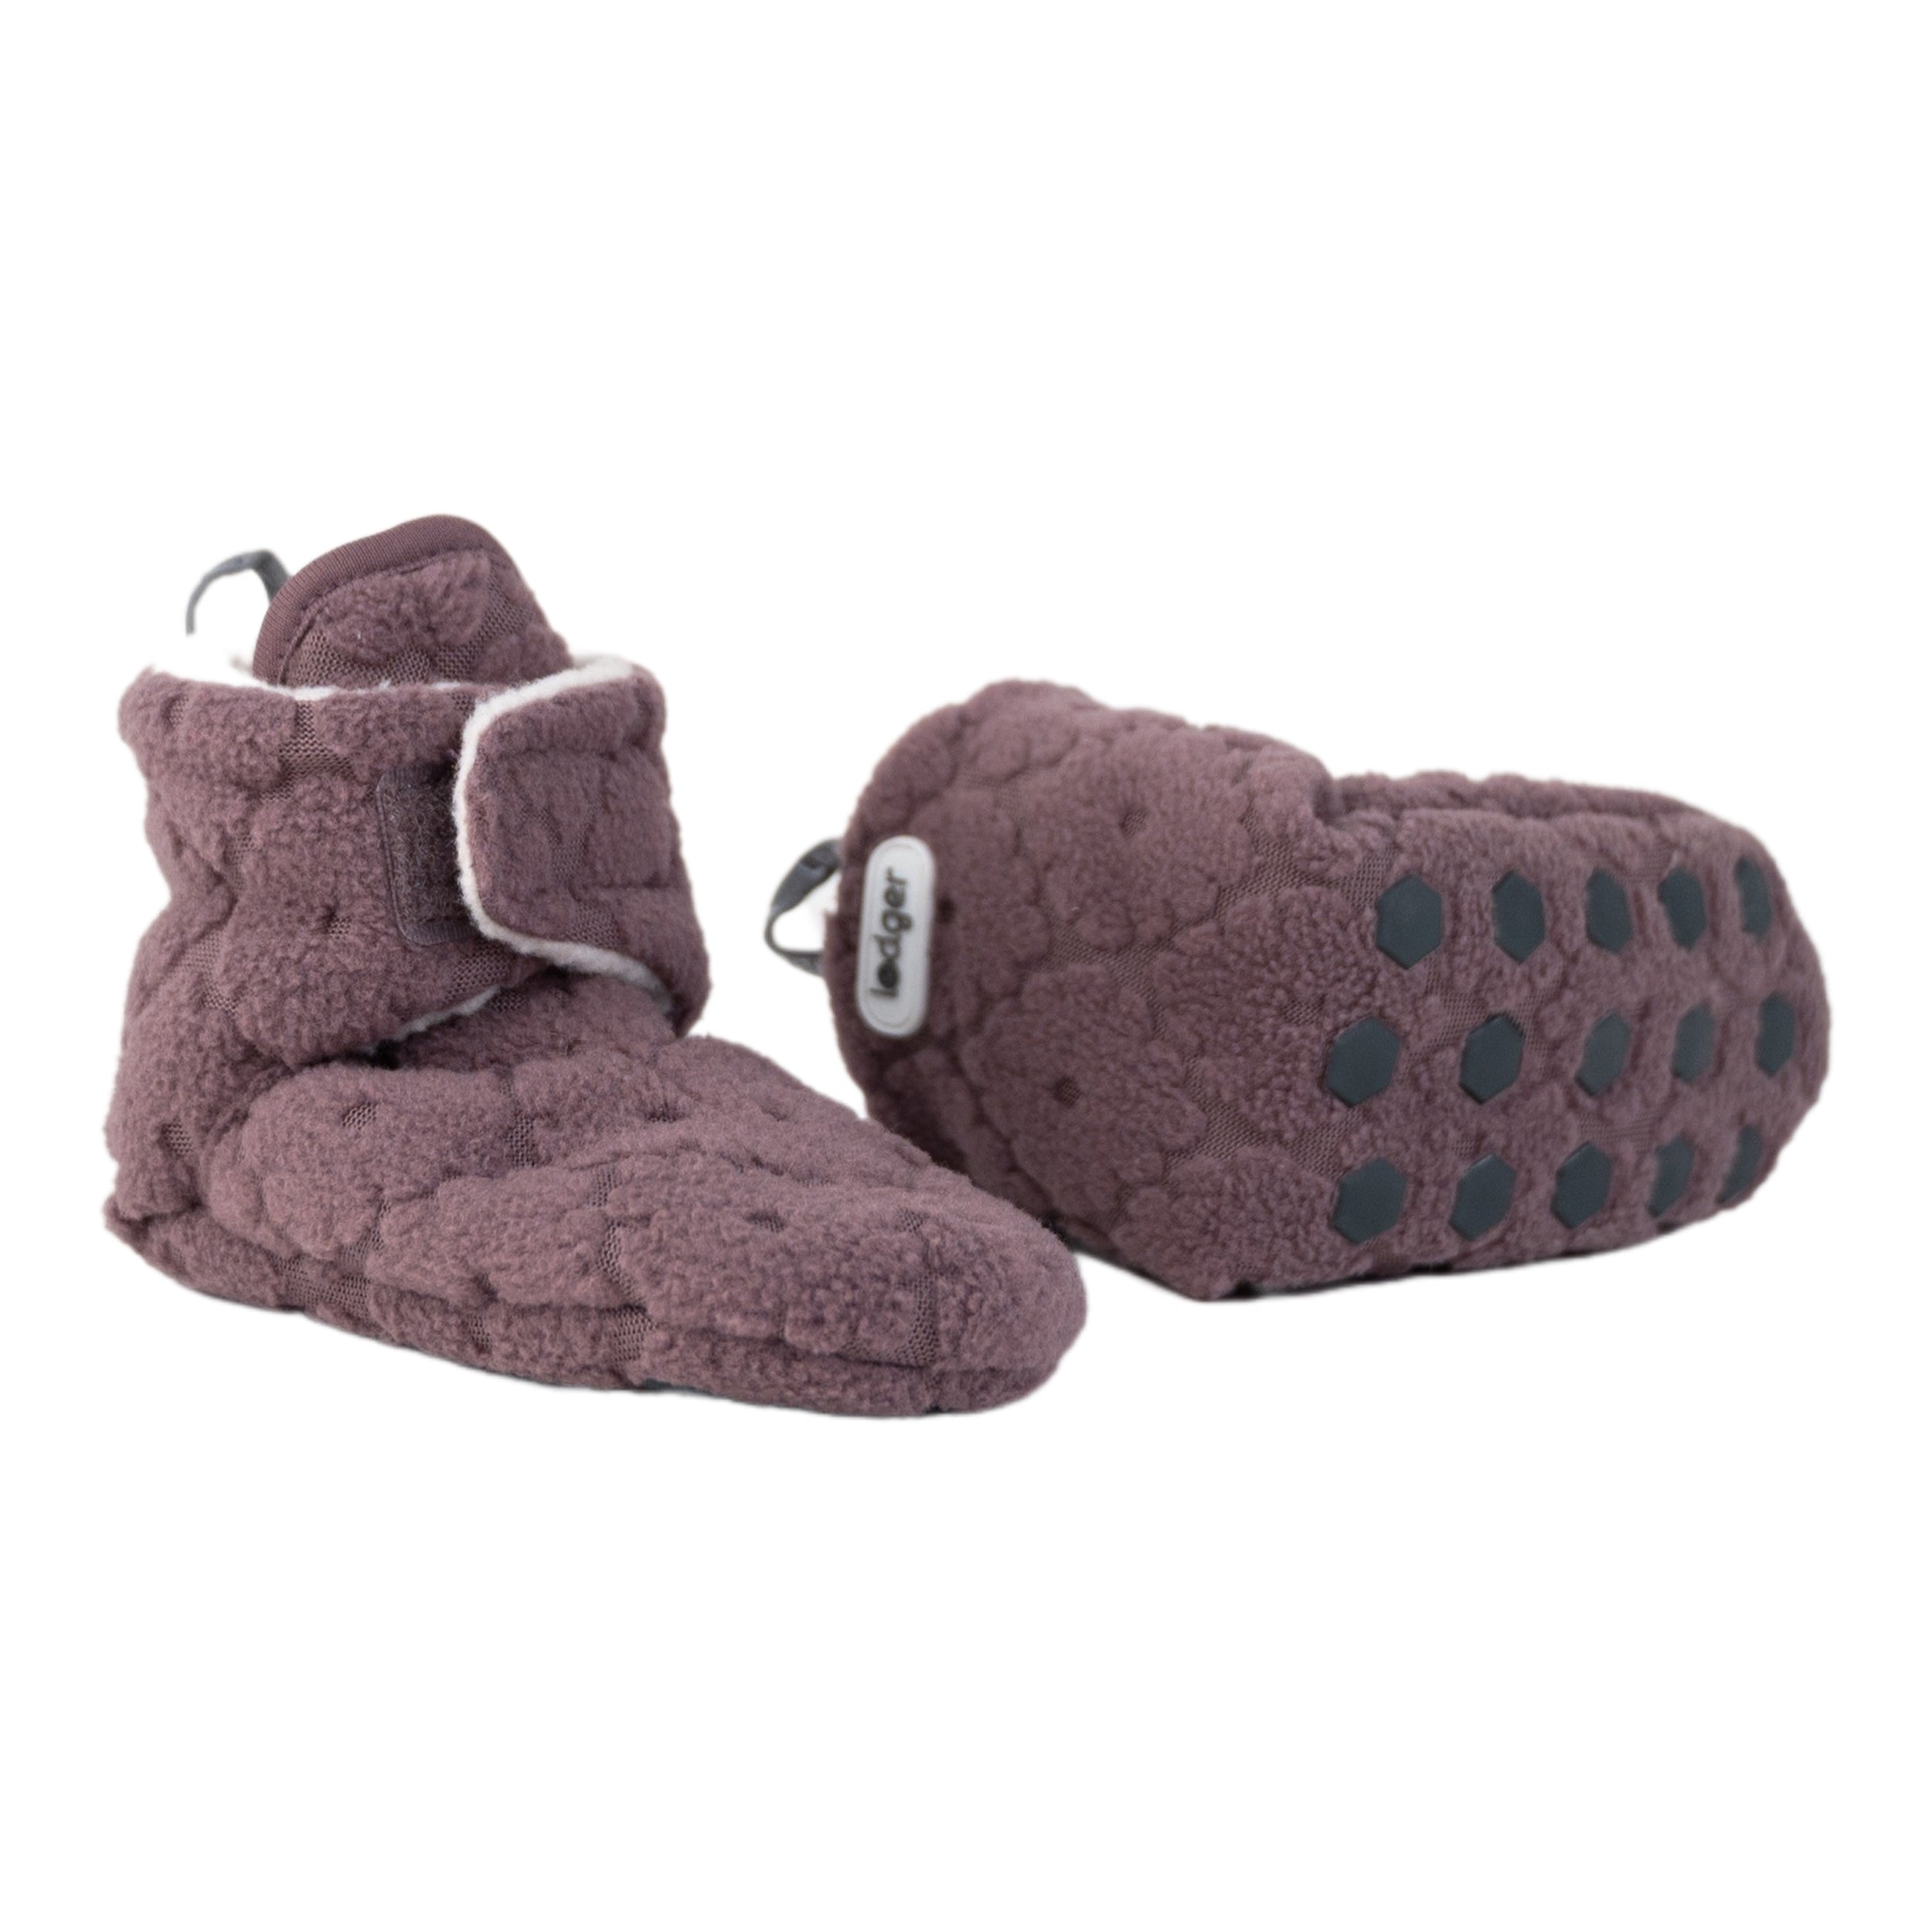 Lodger: fleece shoes slippers from ABS Baby Fleece Slippers